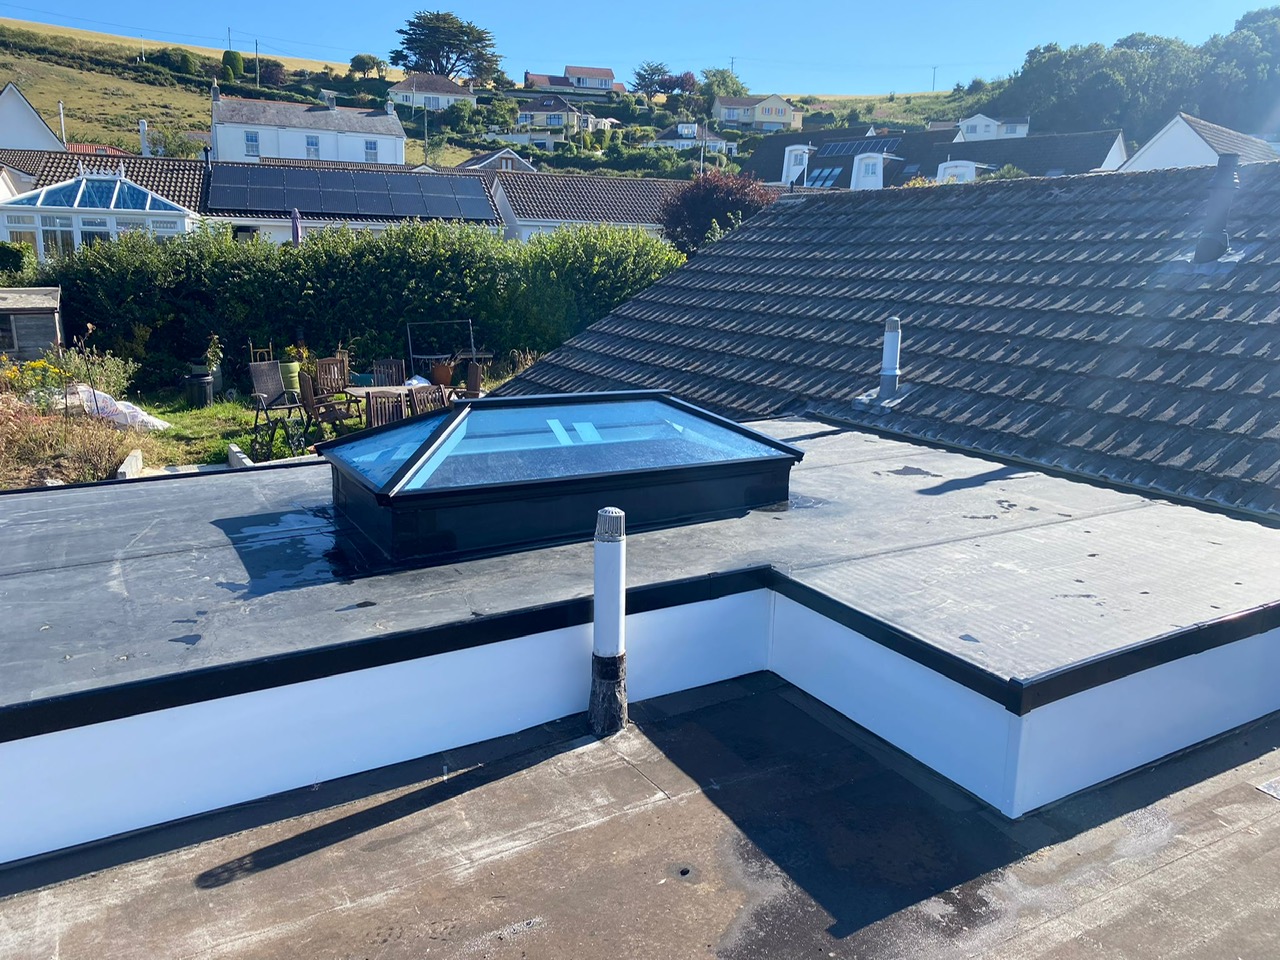 Main image for F H Coombes and Sons - Roofing & Landscaping